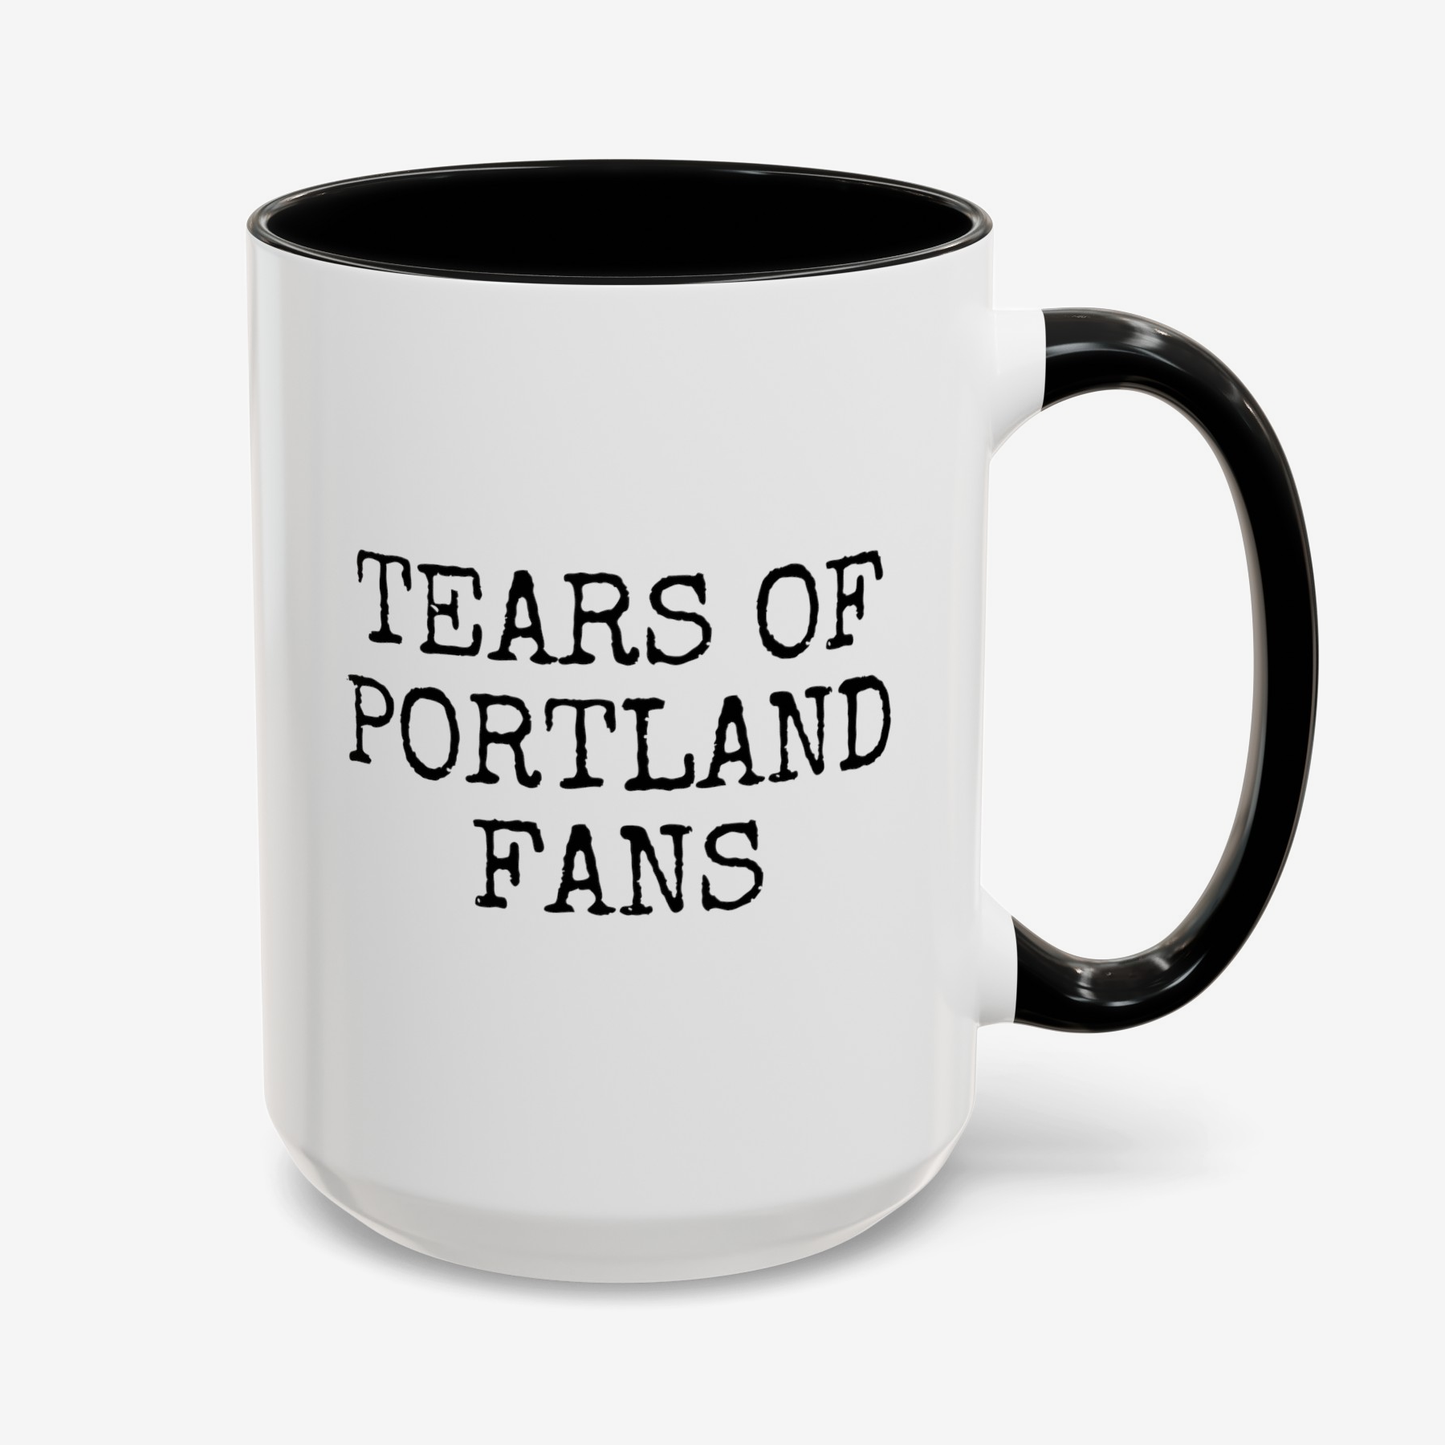 Tears Of Portland Fans 15oz white with black accent funny large coffee mug gift for football footie soccer cup futbol is life waveywares wavey wares wavywares wavy wares cover